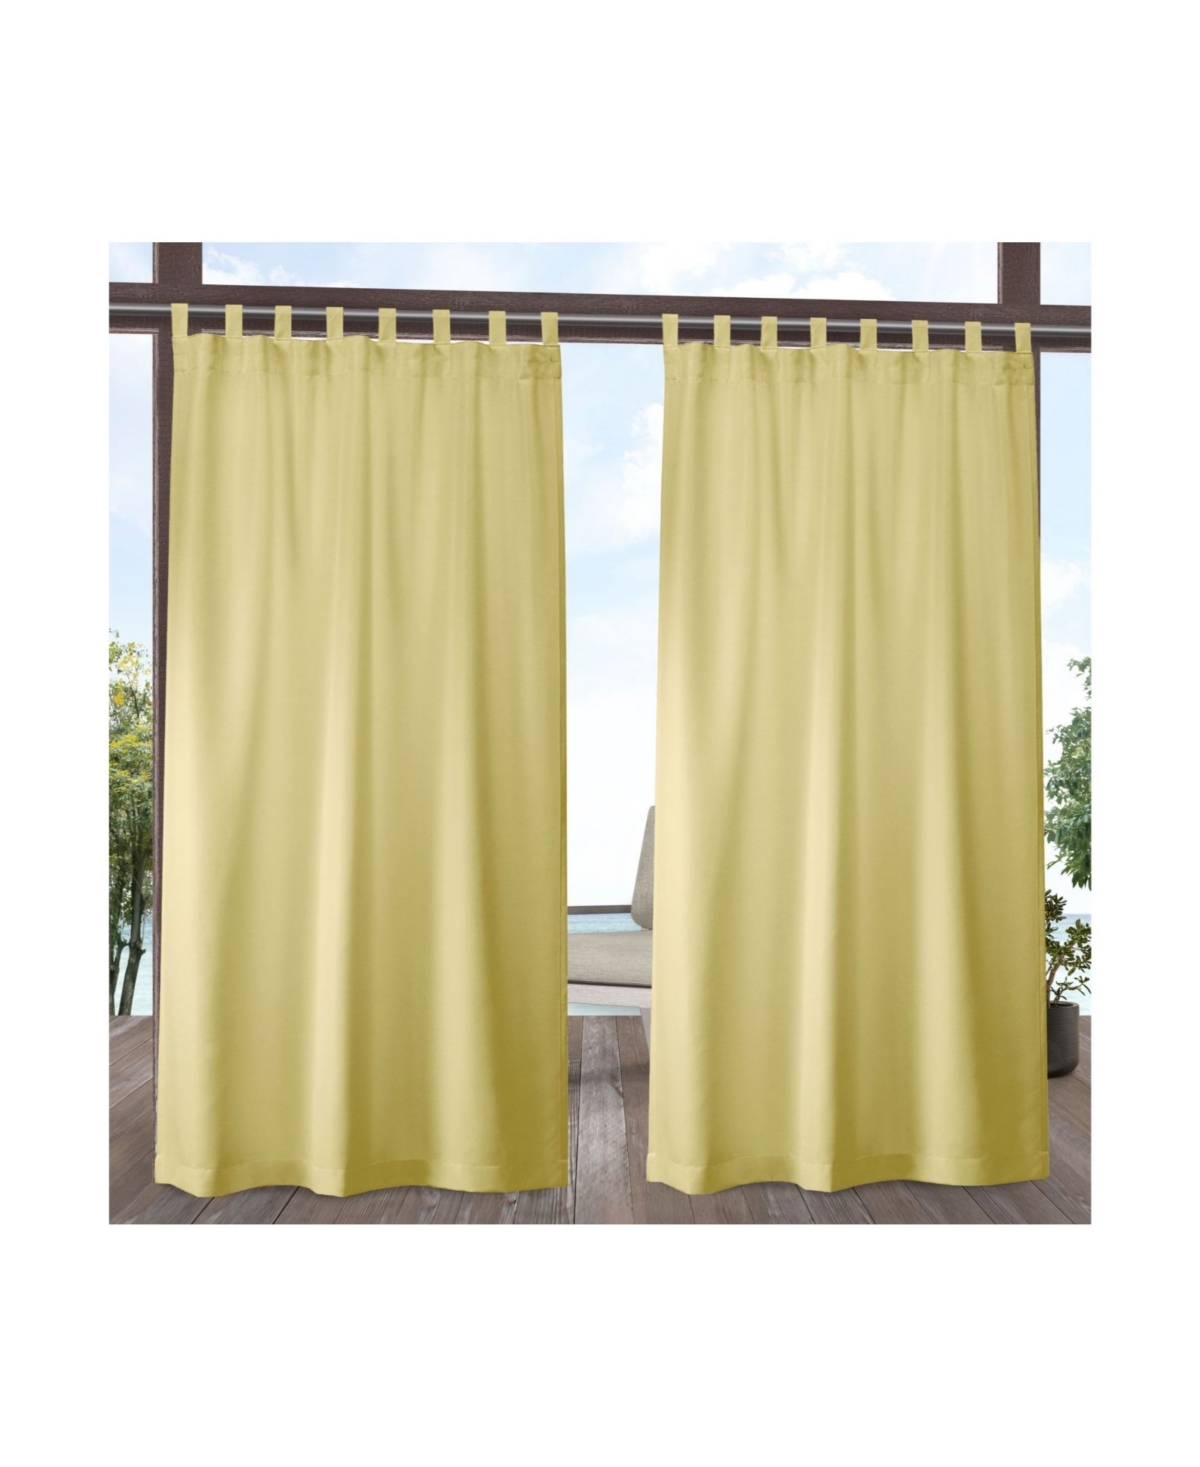 Curtains Indoor - Outdoor Solid Cabana Tab Top Curtain Panel Pair, 54" x 96" - Multi